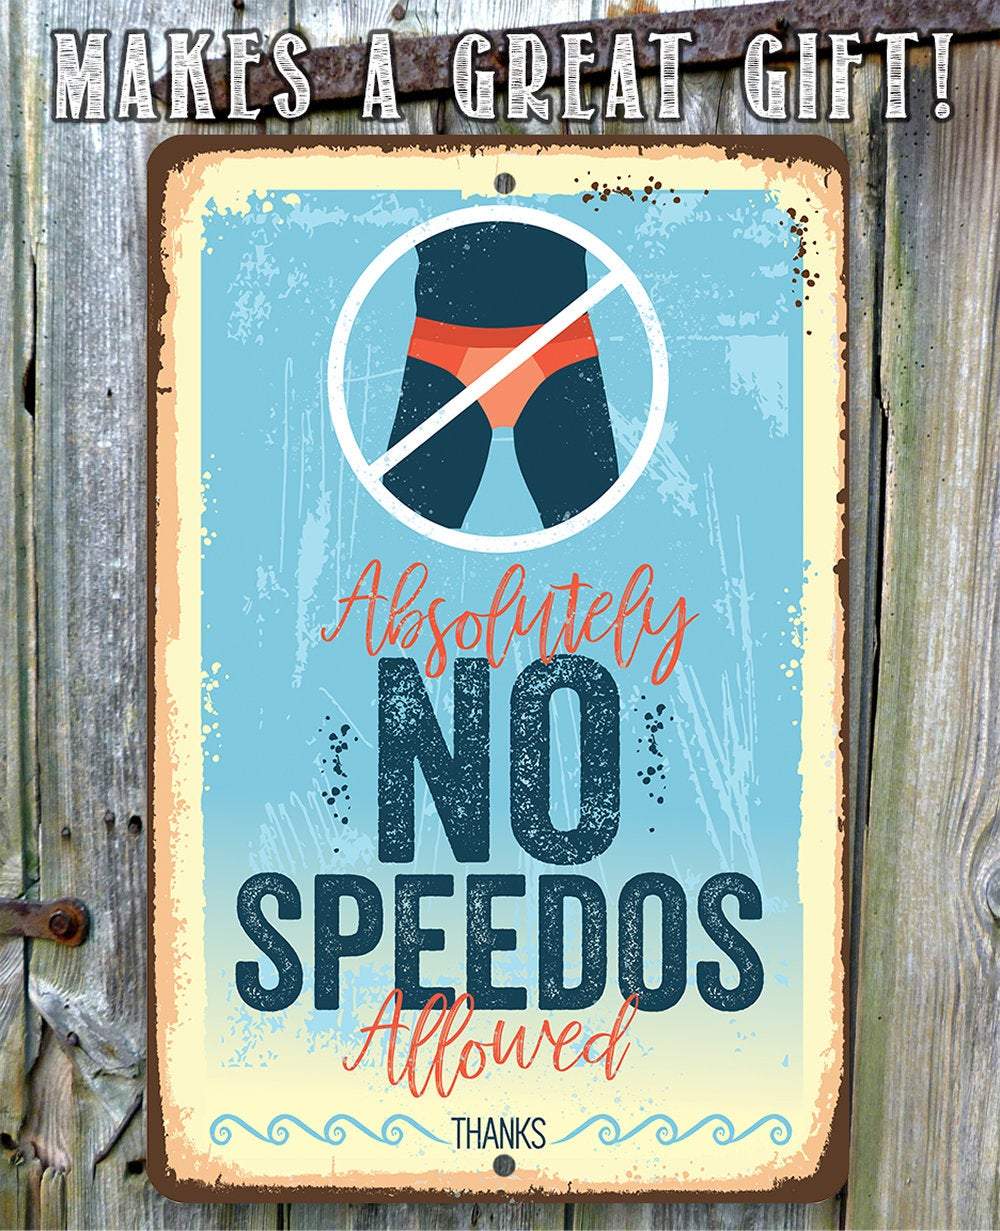 Absolutely No Speedos Allowed - Metal Sign | Lone Star Art.